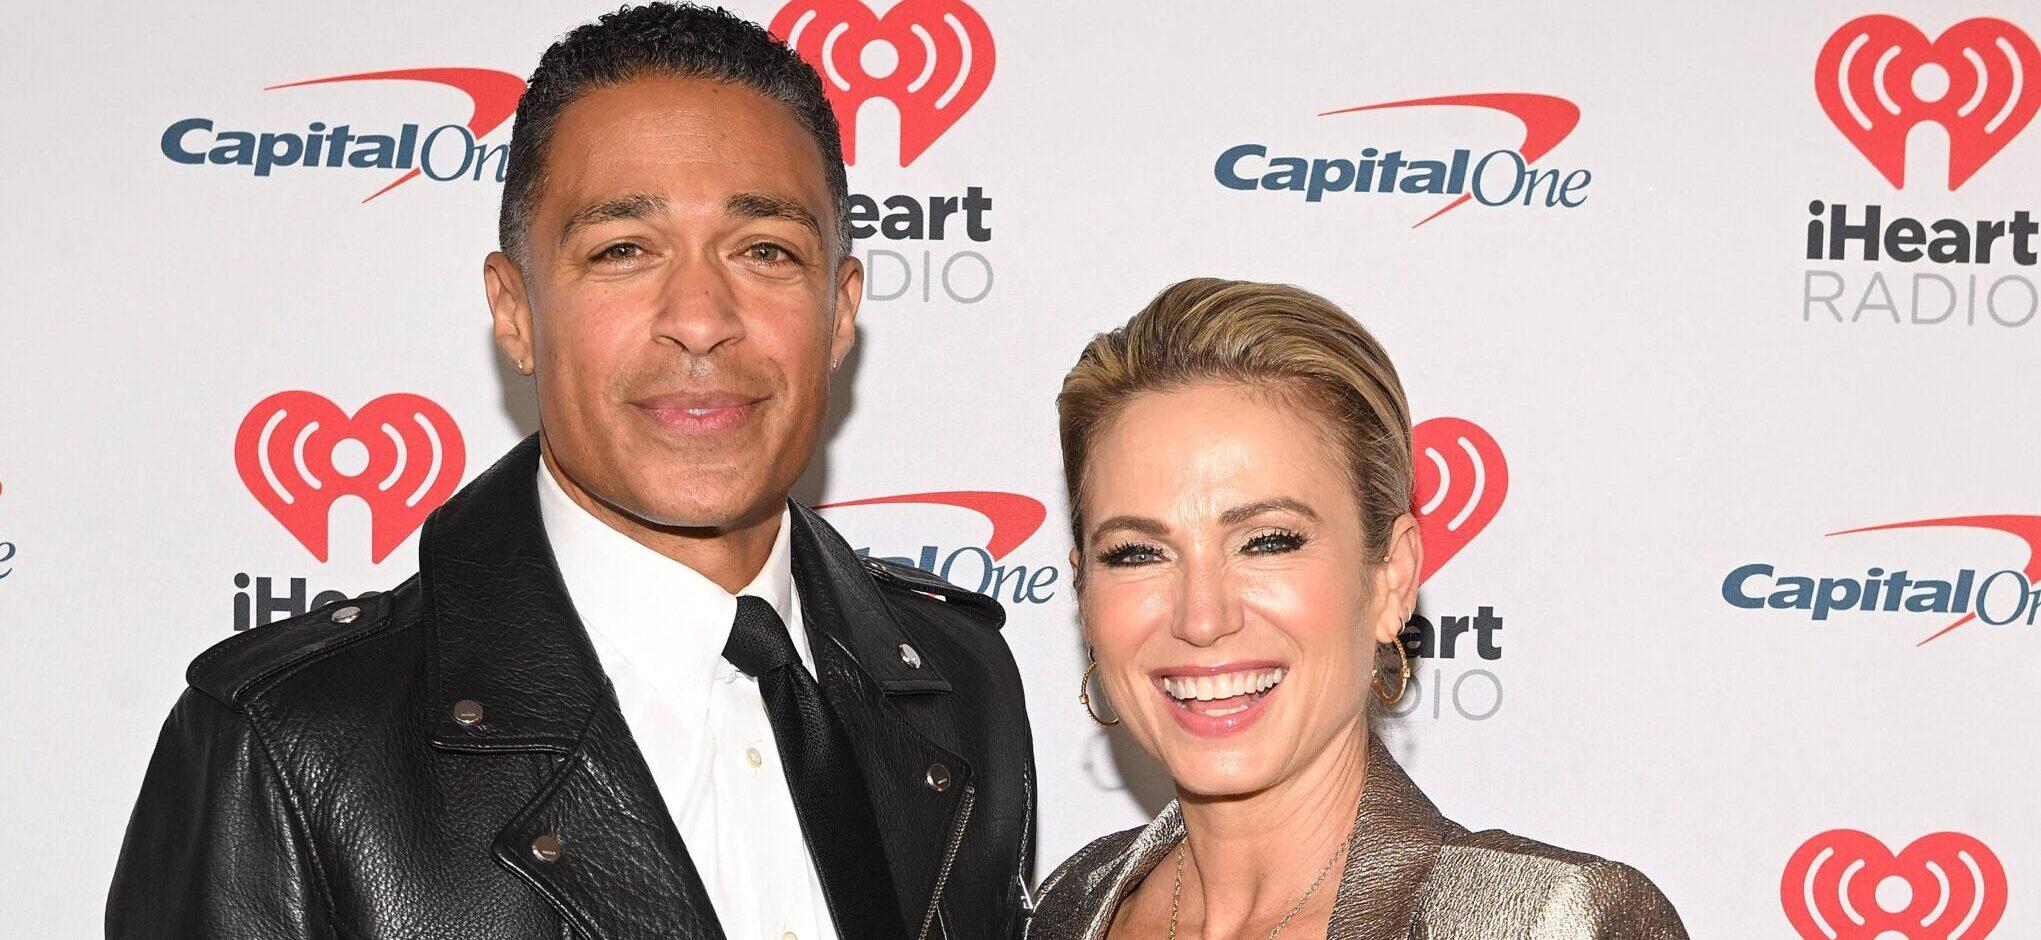 Amy Robach & T.J. Holmes Claim Their Careers Were ‘Unfairly Taken’ In Heated Exchange